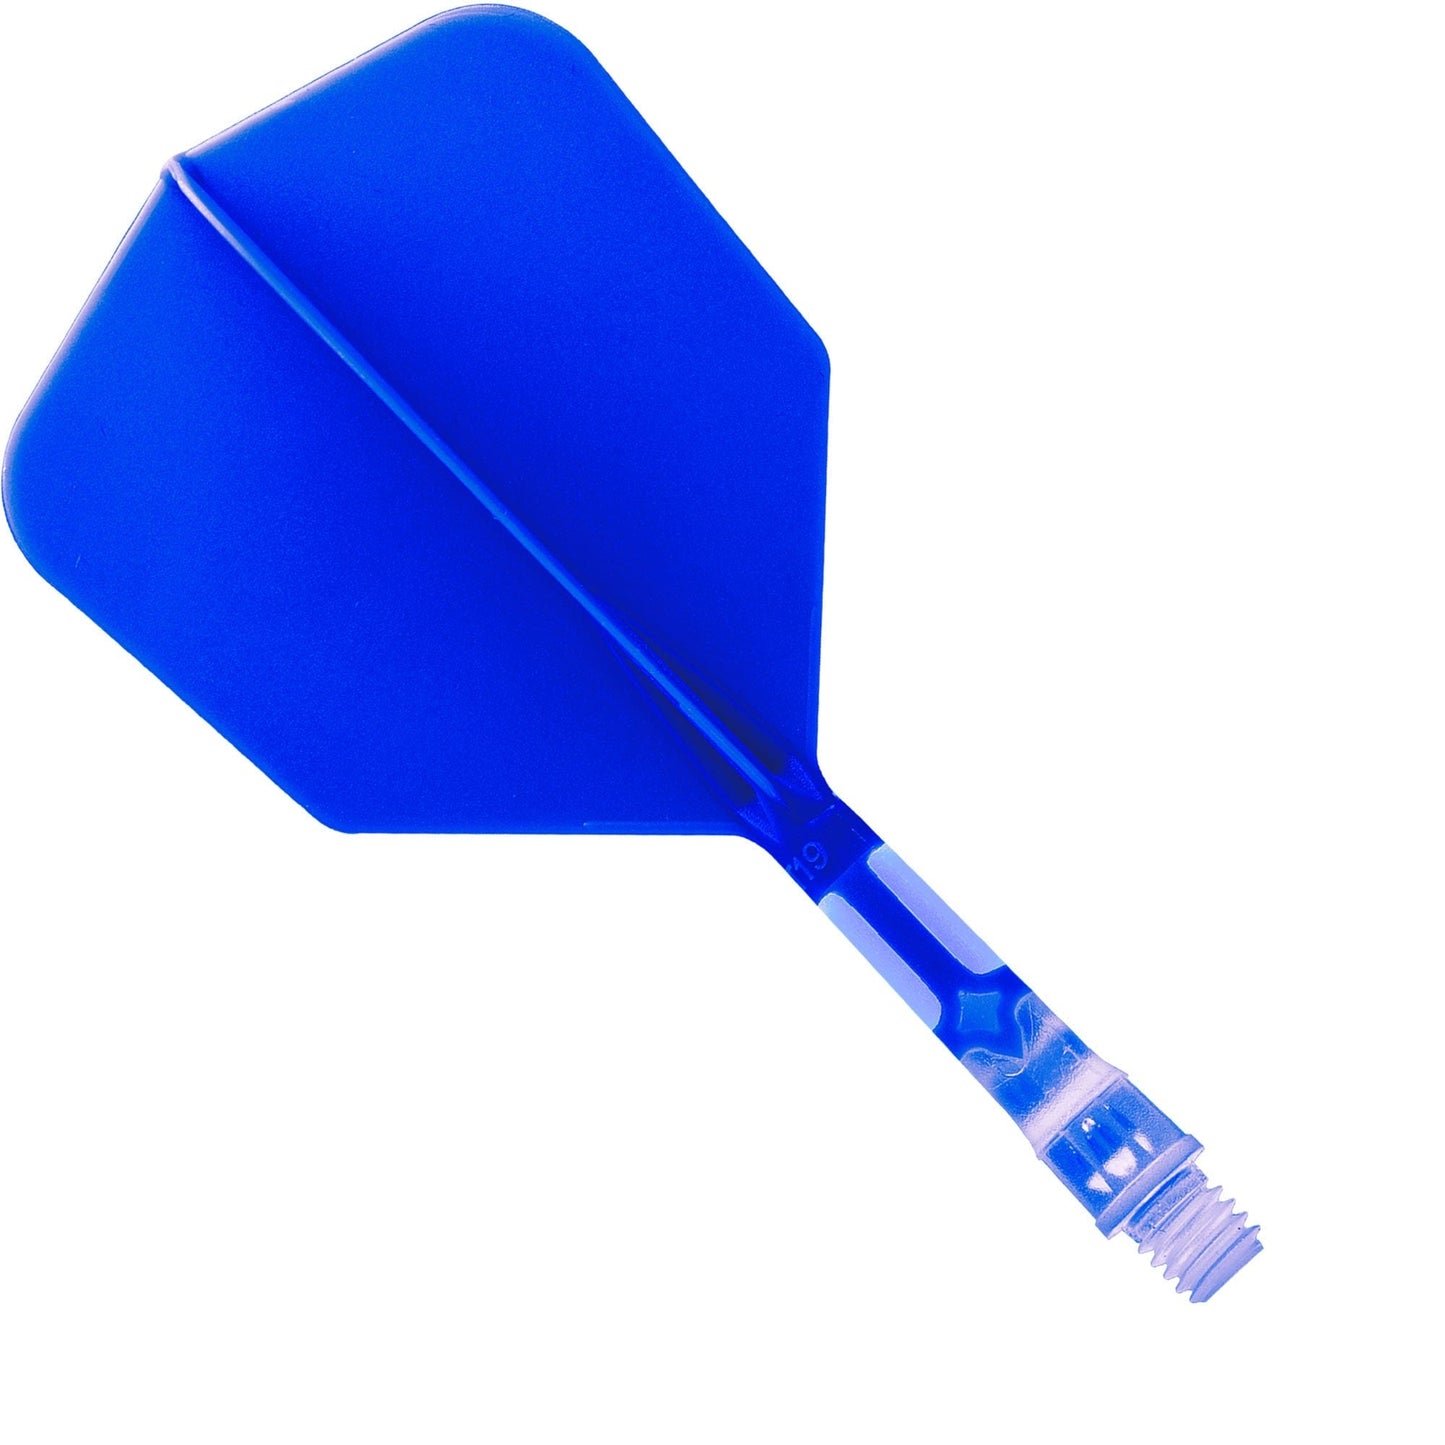 Cuesoul Rost T19 Integrated Dart Shaft and Flights - Big Wing - Clear with Blue Flight Short